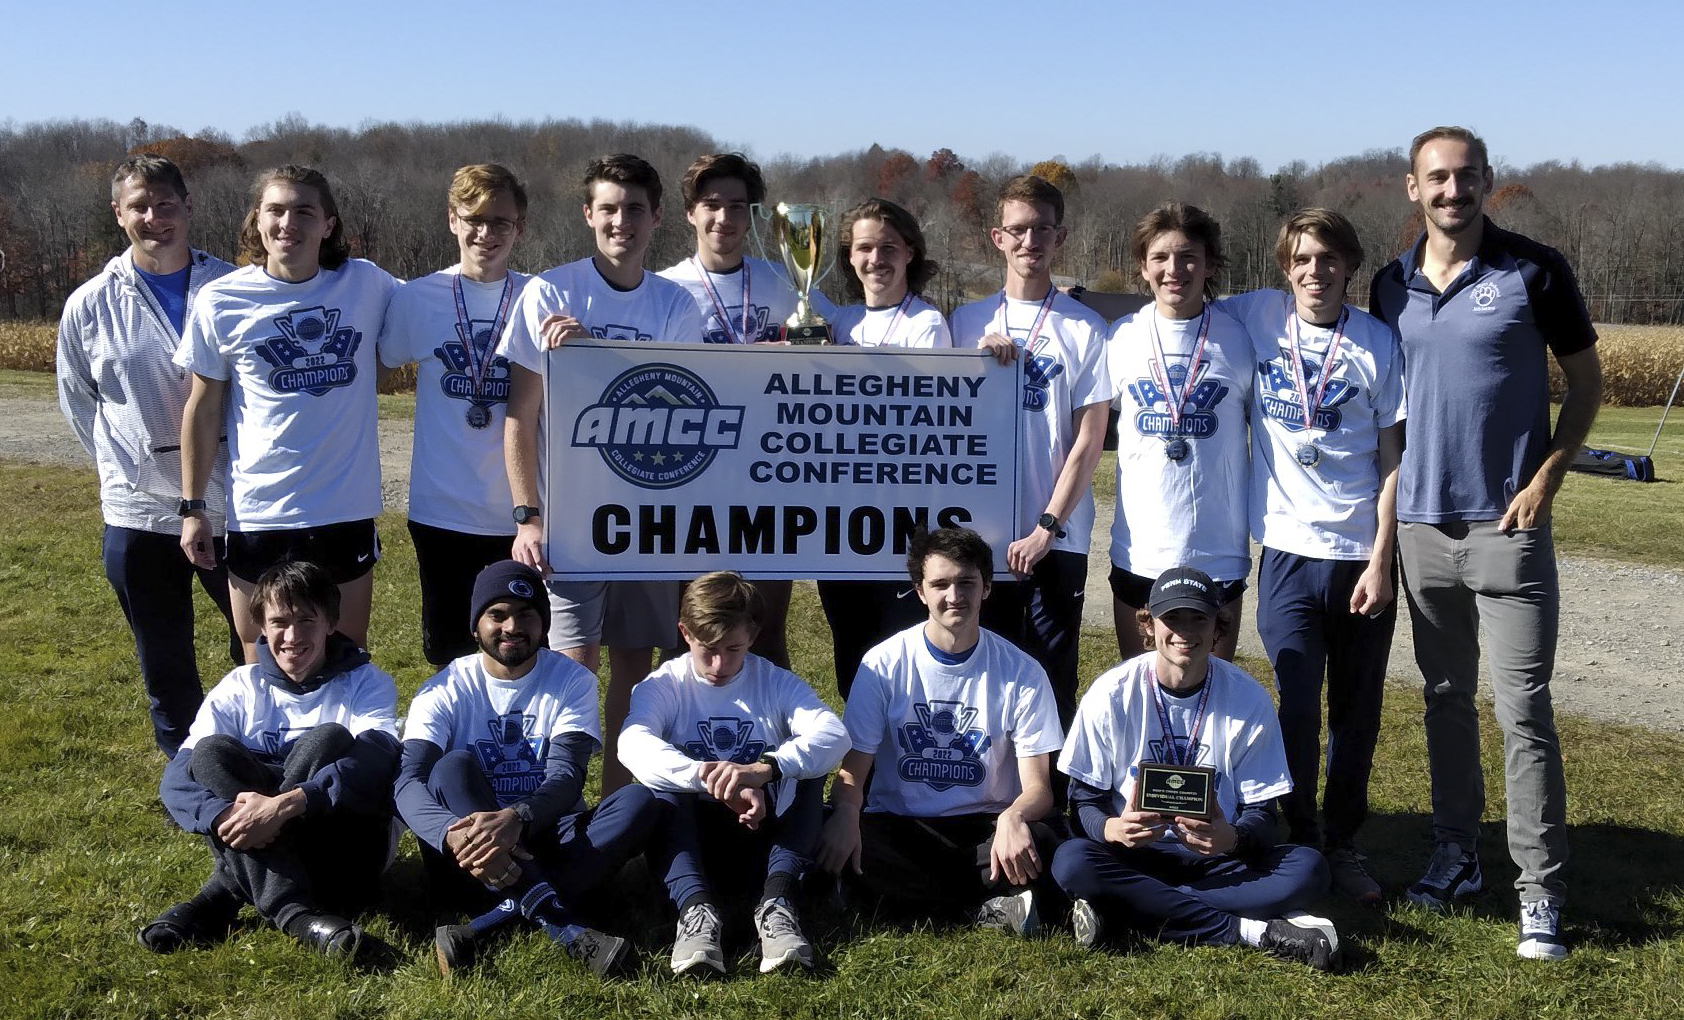 Lions Capture Men's Cross Country AMCC Championship; Klein Crowned Individual Champion